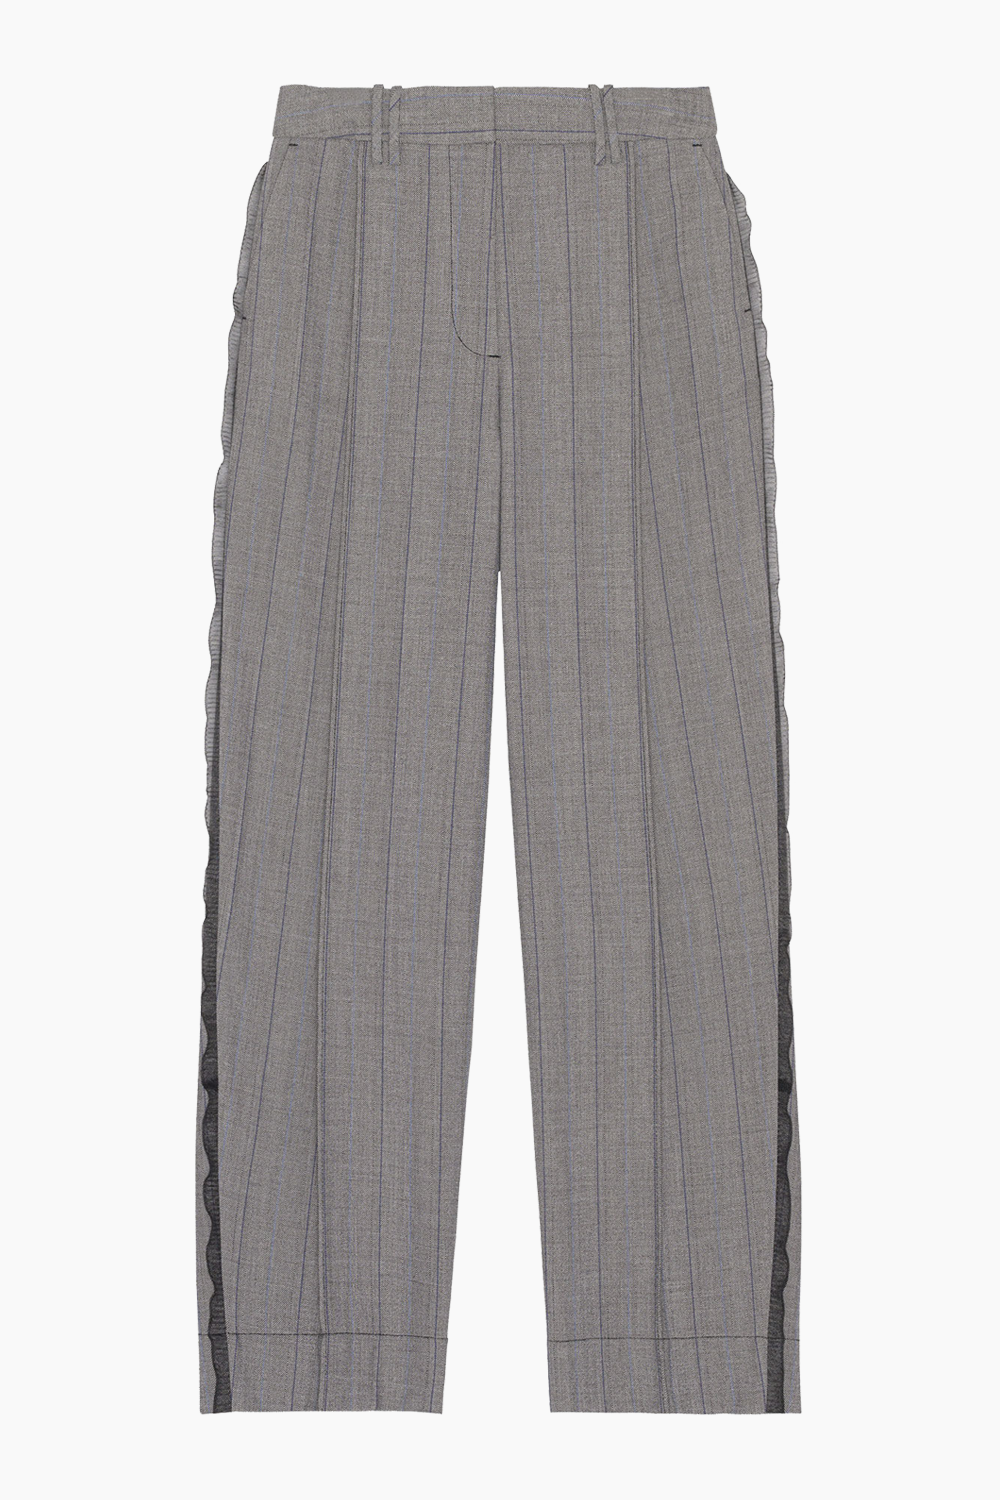 Billede af Herringbone Suiting Relaxed Pleated Pants F8214 - Frost Grey - GANNI - Grå S